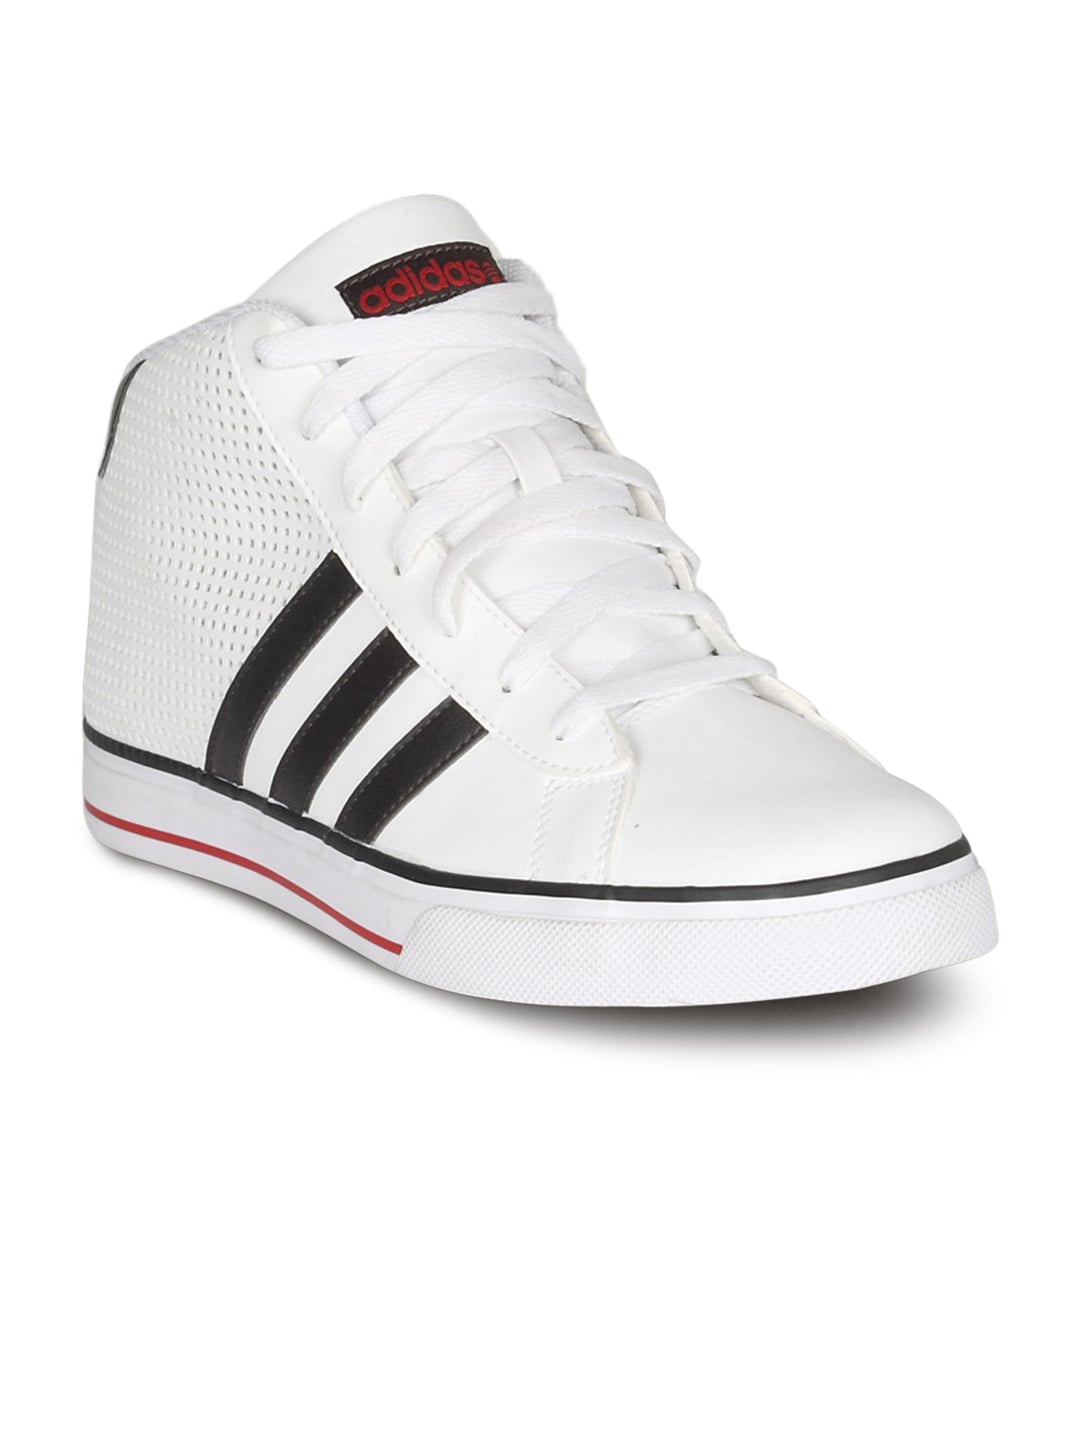 ADIDAS Men's Daily Vulc Mid Structure White Shoe